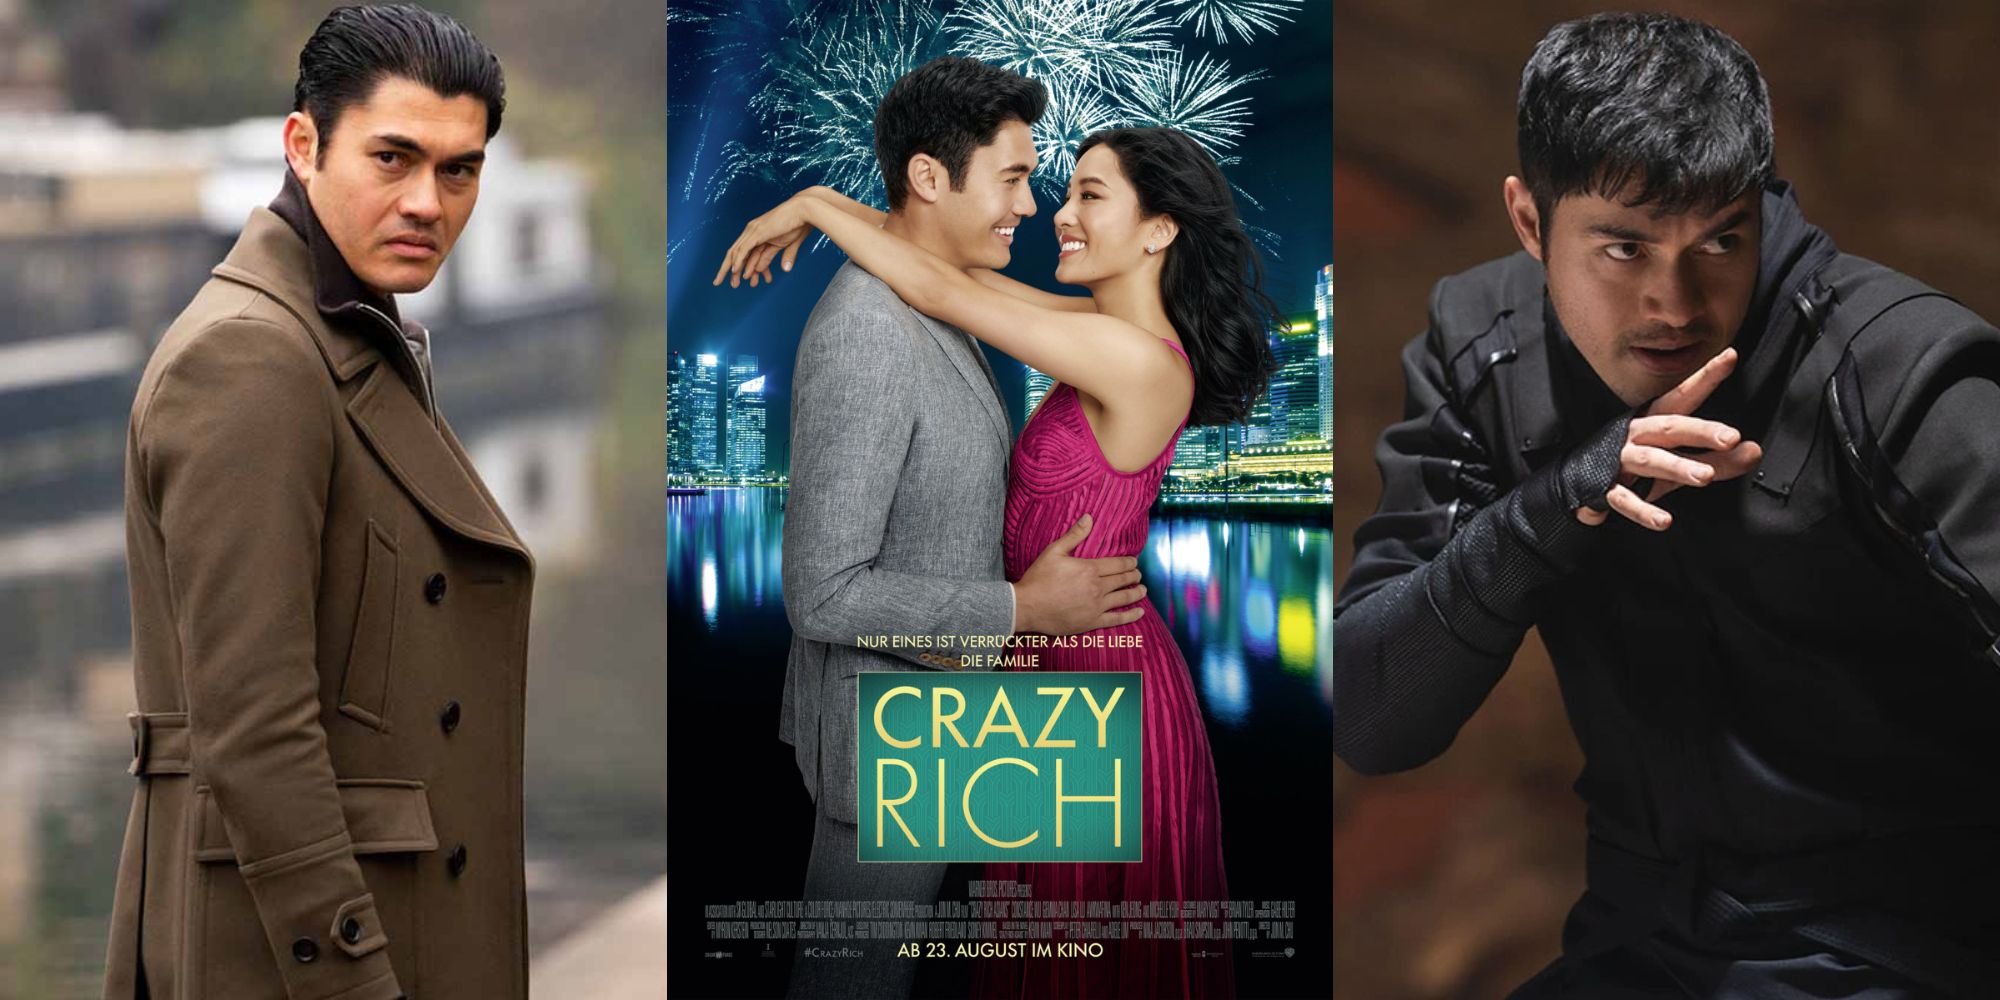 Henry Golding in The Gentlemen, Crazy Rich Asians, and Snake Eyes